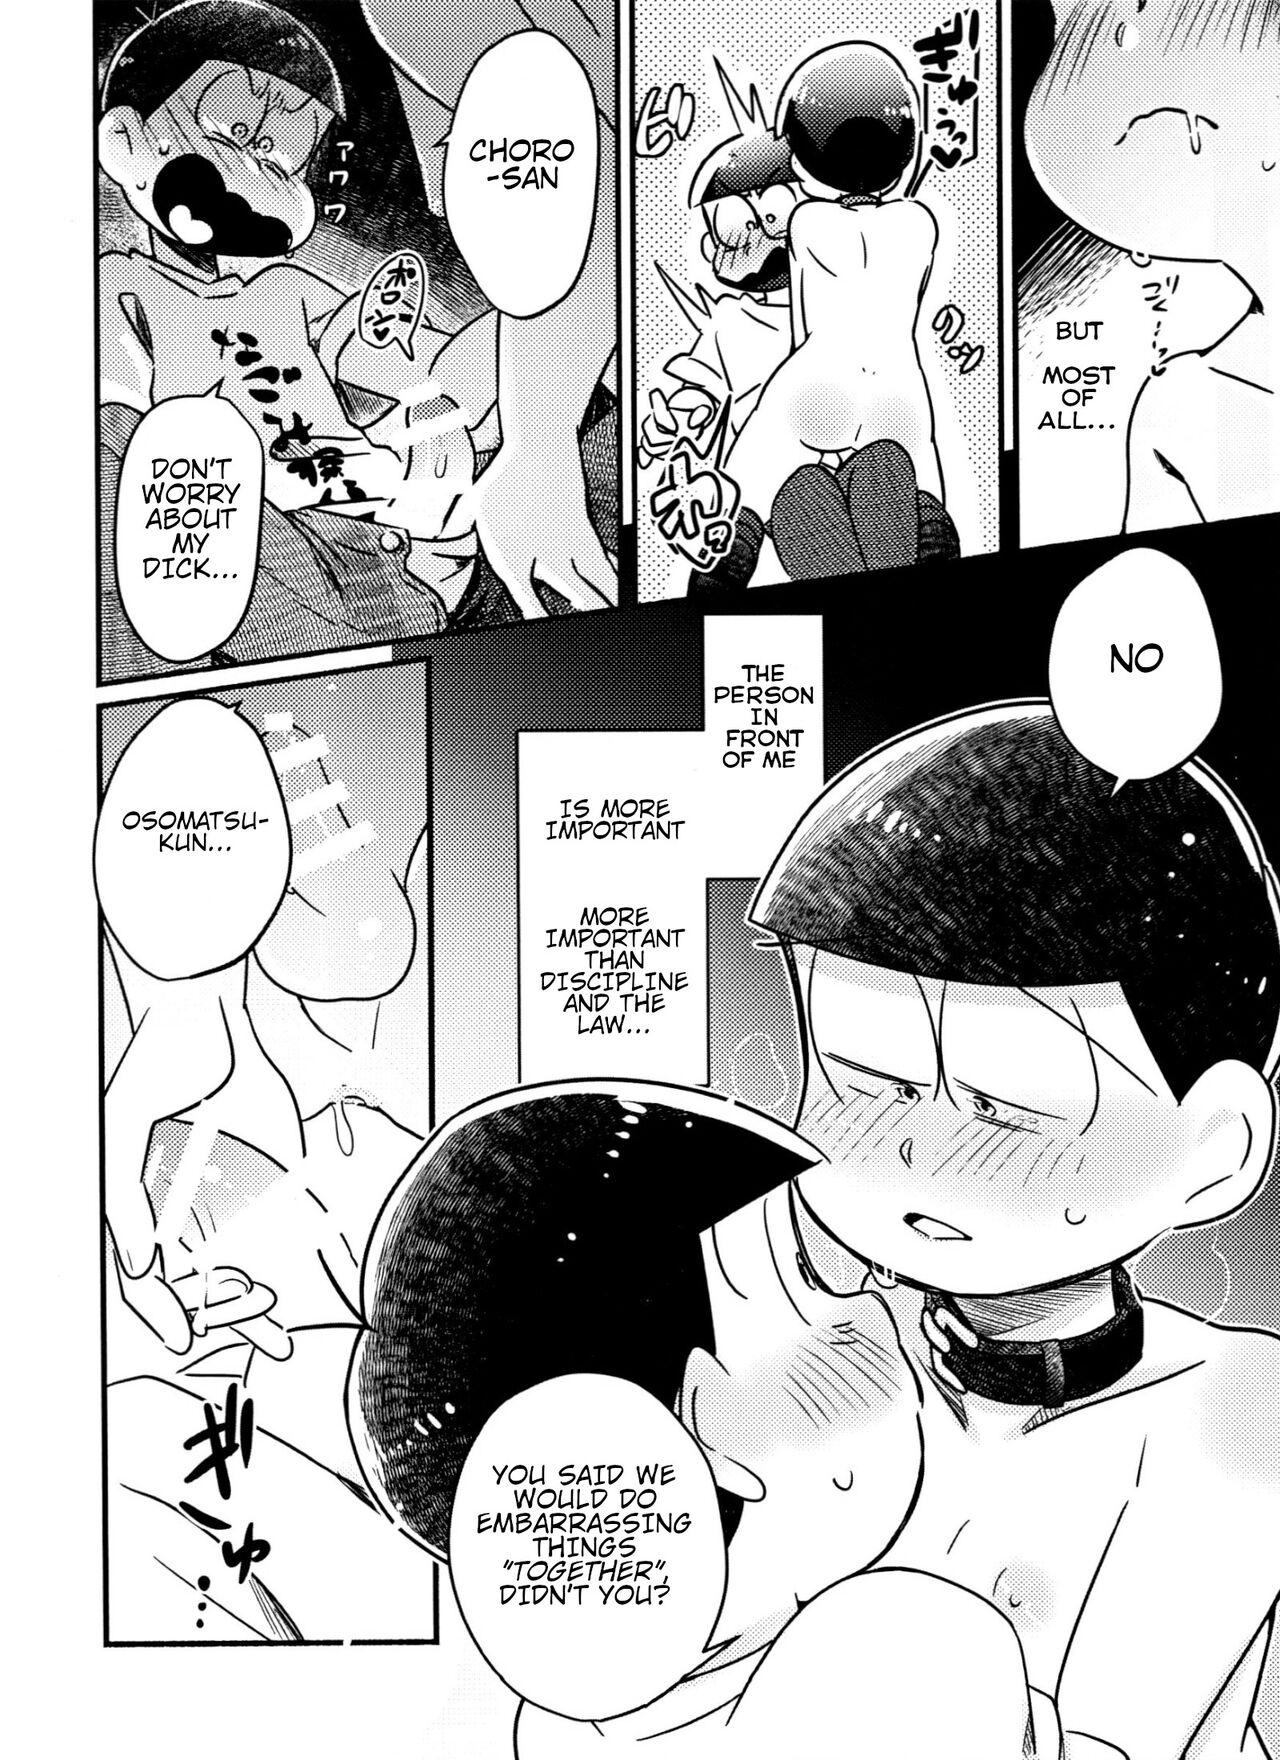 Inspector Choromatsu walks naked at night and does XXX in the public eye R18 book 24